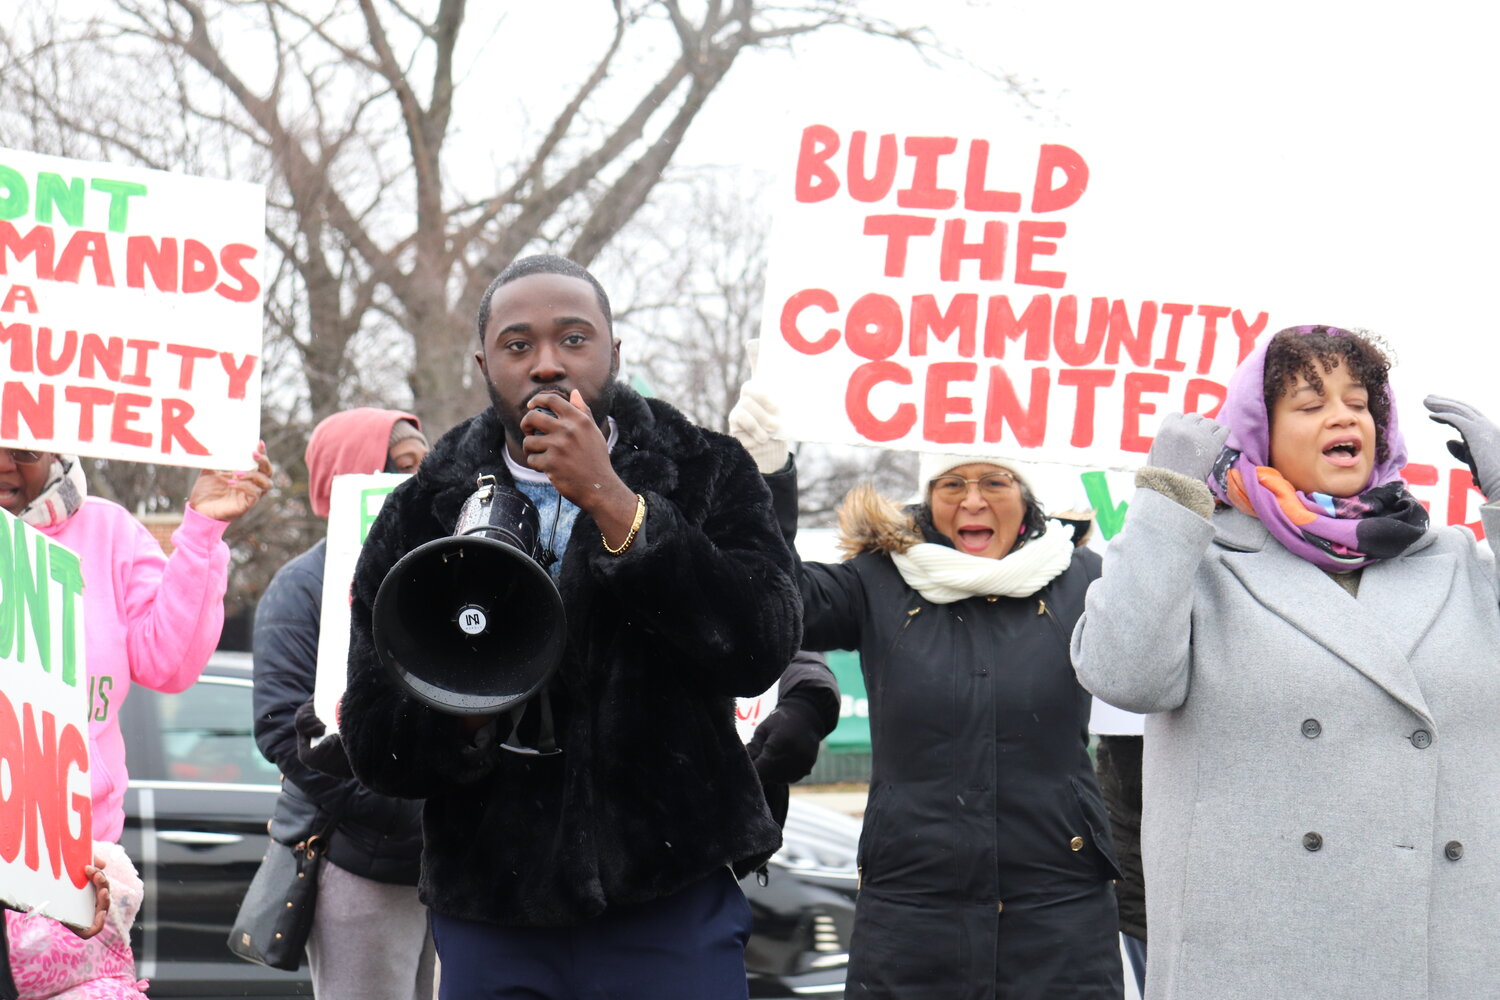 Fenol C. LaRock, an executive director of Elmont-based nonprofit Universal Interactions, Assemblywoman Michaelle Solages, and community members call for New York Arena Partners to fulfill its promise to build a community center in Elmont during a rally outside UBS Arena on Hempstead Turnpike last Sunday.